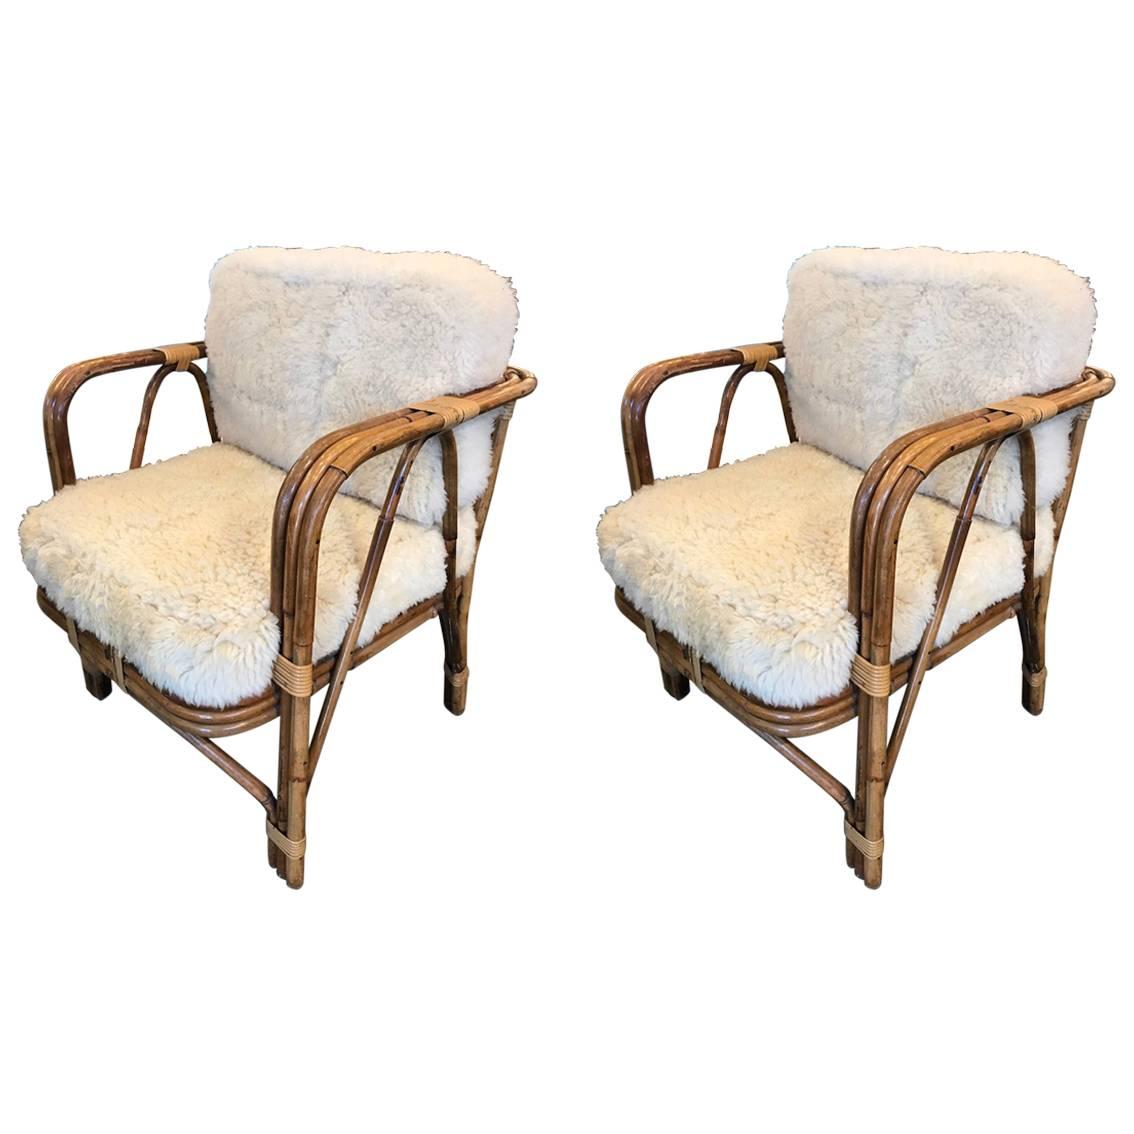 Beautiful Pair of Wicker Armchairs Attributed to Audoux Minet, circa 1960 For Sale